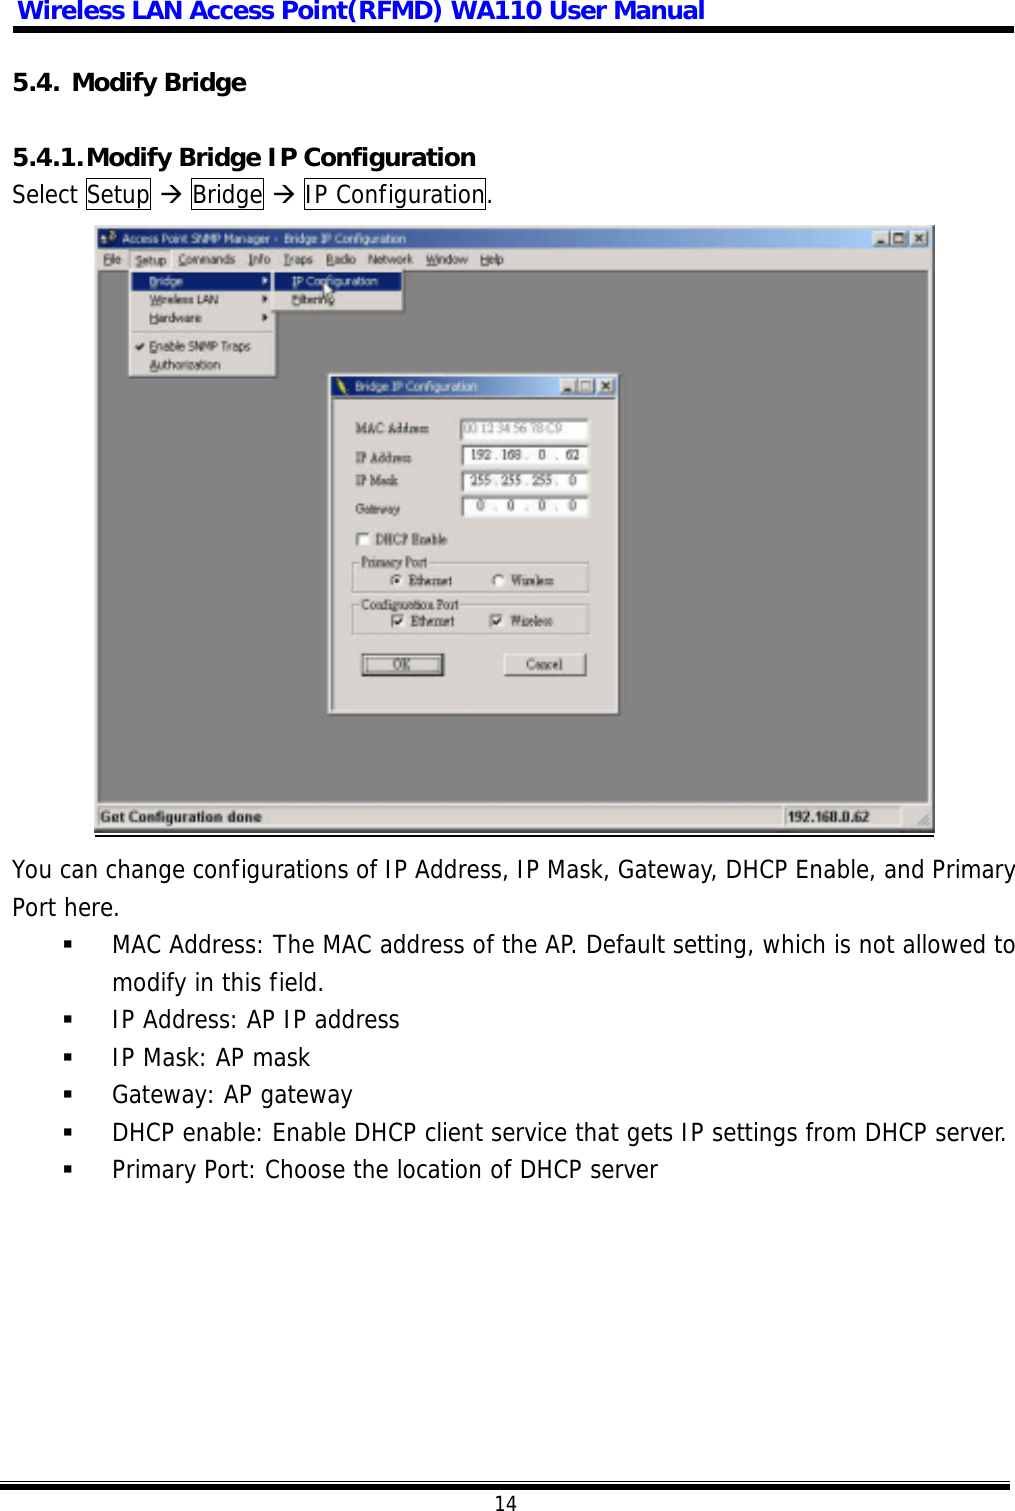 Wireless LAN Access Point(RFMD) WA110 User Manual  14  5.4. Modify Bridge  5.4.1. Modify Bridge IP Configuration Select Setup  Bridge  IP Configuration.   You can change configurations of IP Address, IP Mask, Gateway, DHCP Enable, and Primary Port here.   MAC Address: The MAC address of the AP. Default setting, which is not allowed to modify in this field.   IP Address: AP IP address   IP Mask: AP mask   Gateway: AP gateway   DHCP enable: Enable DHCP client service that gets IP settings from DHCP server.   Primary Port: Choose the location of DHCP server  